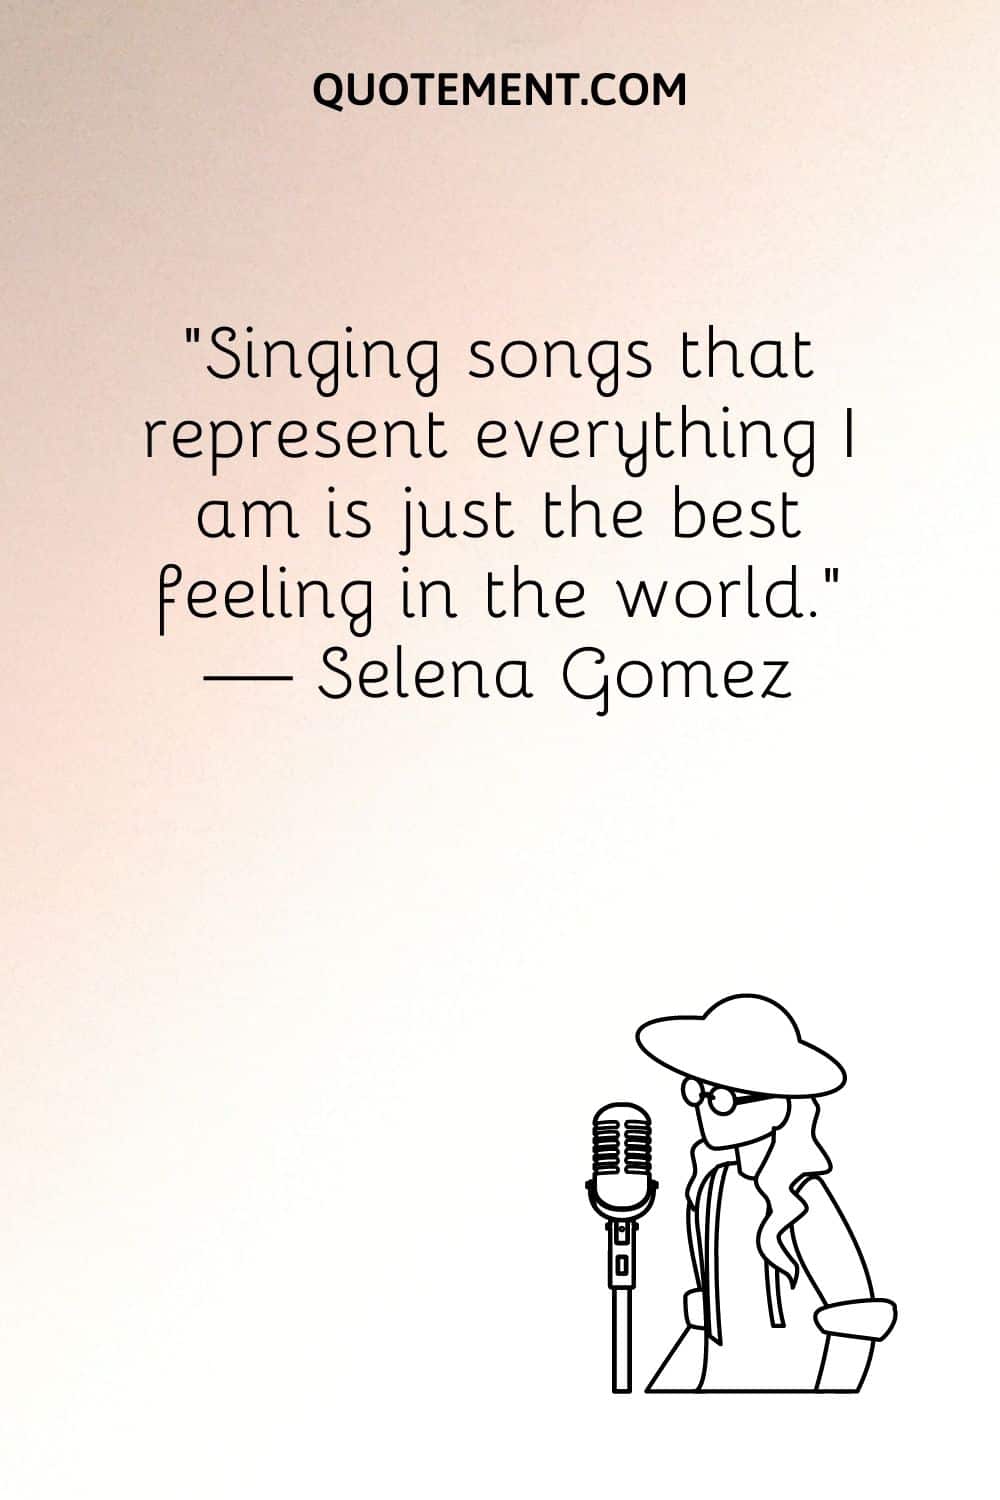 “Singing songs that represent everything I am is just the best feeling in the world.” — Selena Gomez